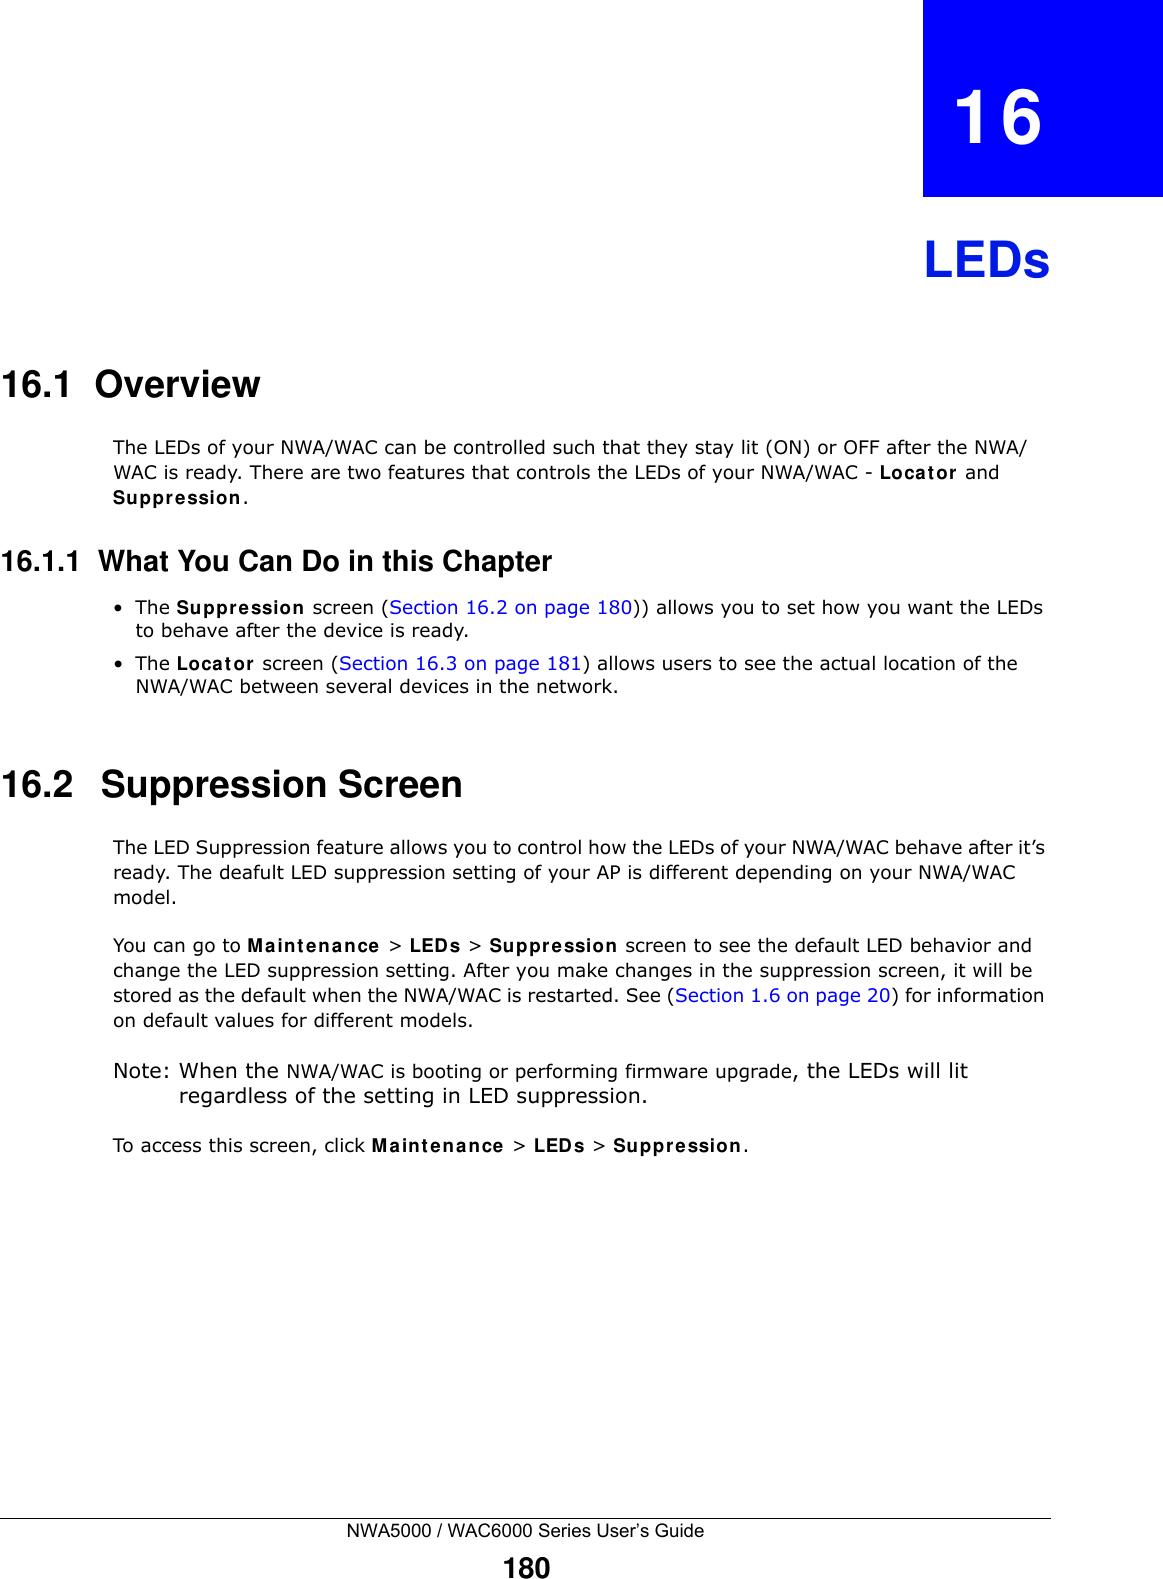 NWA5000 / WAC6000 Series User’s Guide180CHAPTER   16LEDs16.1  OverviewThe LEDs of your NWA/WAC can be controlled such that they stay lit (ON) or OFF after the NWA/WAC is ready. There are two features that controls the LEDs of your NWA/WAC - Loca t or  and Suppression.16.1.1  What You Can Do in this Chapter•The Suppression screen (Section 16.2 on page 180)) allows you to set how you want the LEDs to behave after the device is ready. •The Loca t or  screen (Section 16.3 on page 181) allows users to see the actual location of the NWA/WAC between several devices in the network.16.2   Suppression Screen The LED Suppression feature allows you to control how the LEDs of your NWA/WAC behave after it’s ready. The deafult LED suppression setting of your AP is different depending on your NWA/WAC model. You can go to M ain t en ance  &gt; LED s &gt; Suppre ssion screen to see the default LED behavior and change the LED suppression setting. After you make changes in the suppression screen, it will be stored as the default when the NWA/WAC is restarted. See (Section 1.6 on page 20) for information on default values for different models.Note: When the NWA/WAC is booting or performing firmware upgrade, the LEDs will lit regardless of the setting in LED suppression.To access this screen, click M a in t e na nce  &gt; LED s &gt; Suppression.